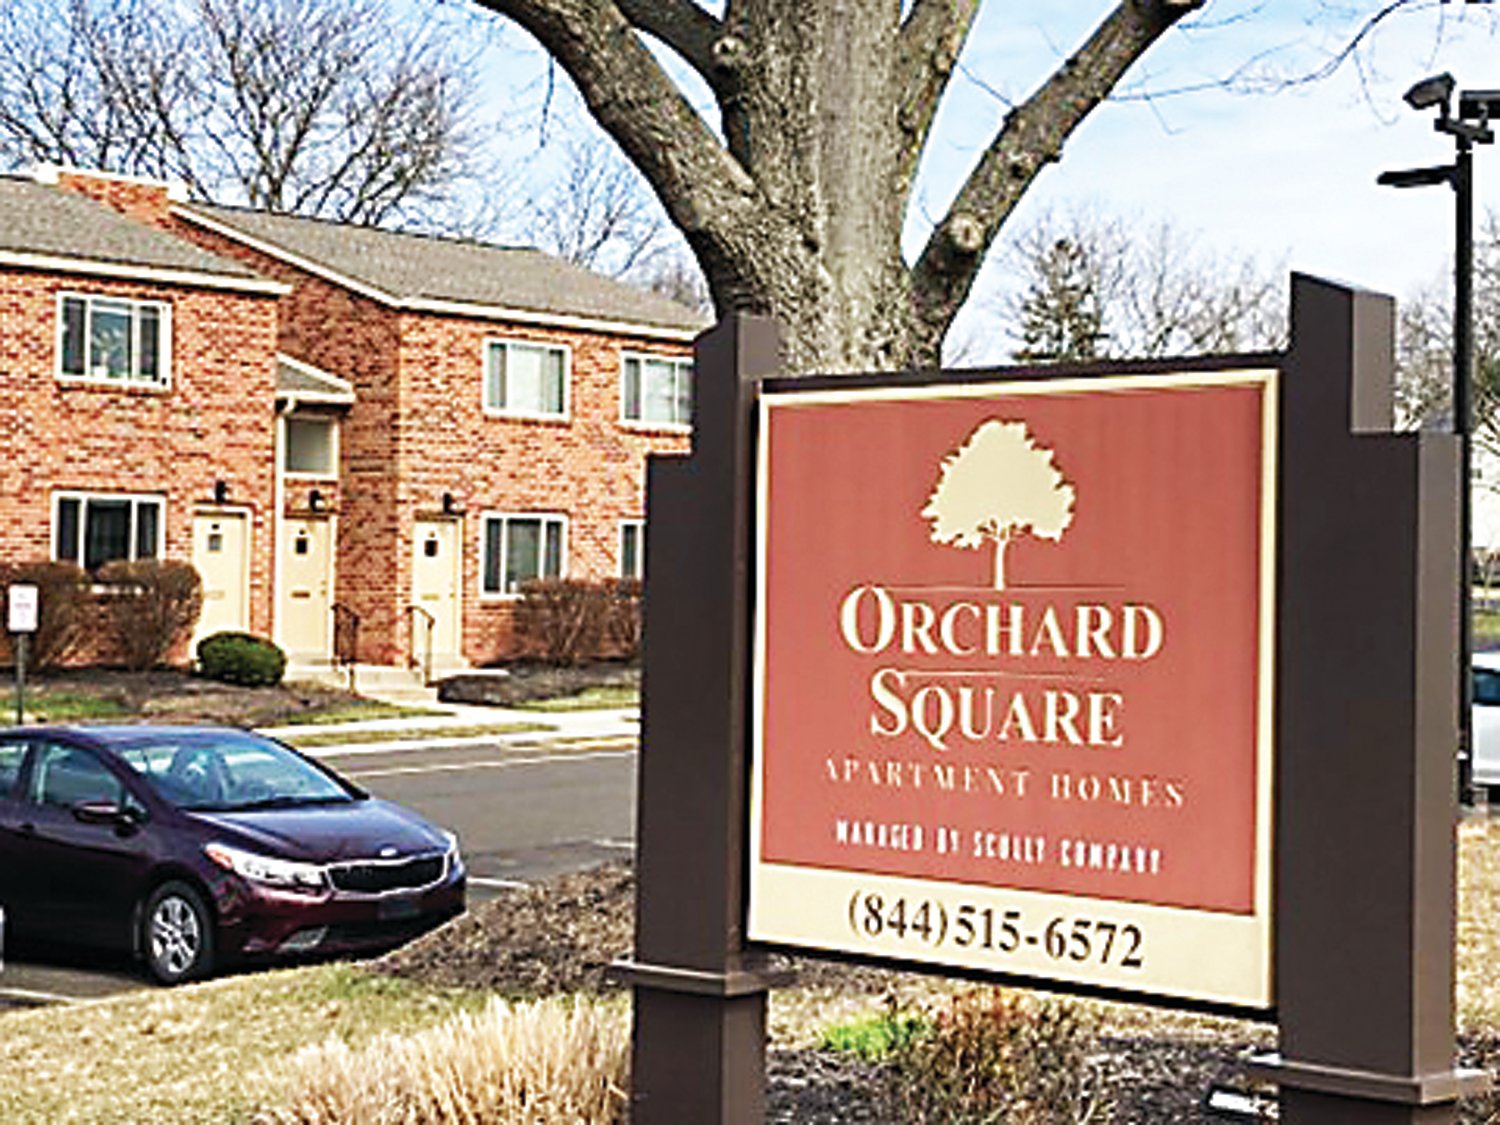 Orchard Square Apartments in Middletown Township will be getting five new buildings with a total of 72 more units if land development approval for the addition is granted by the township board of supervisors.